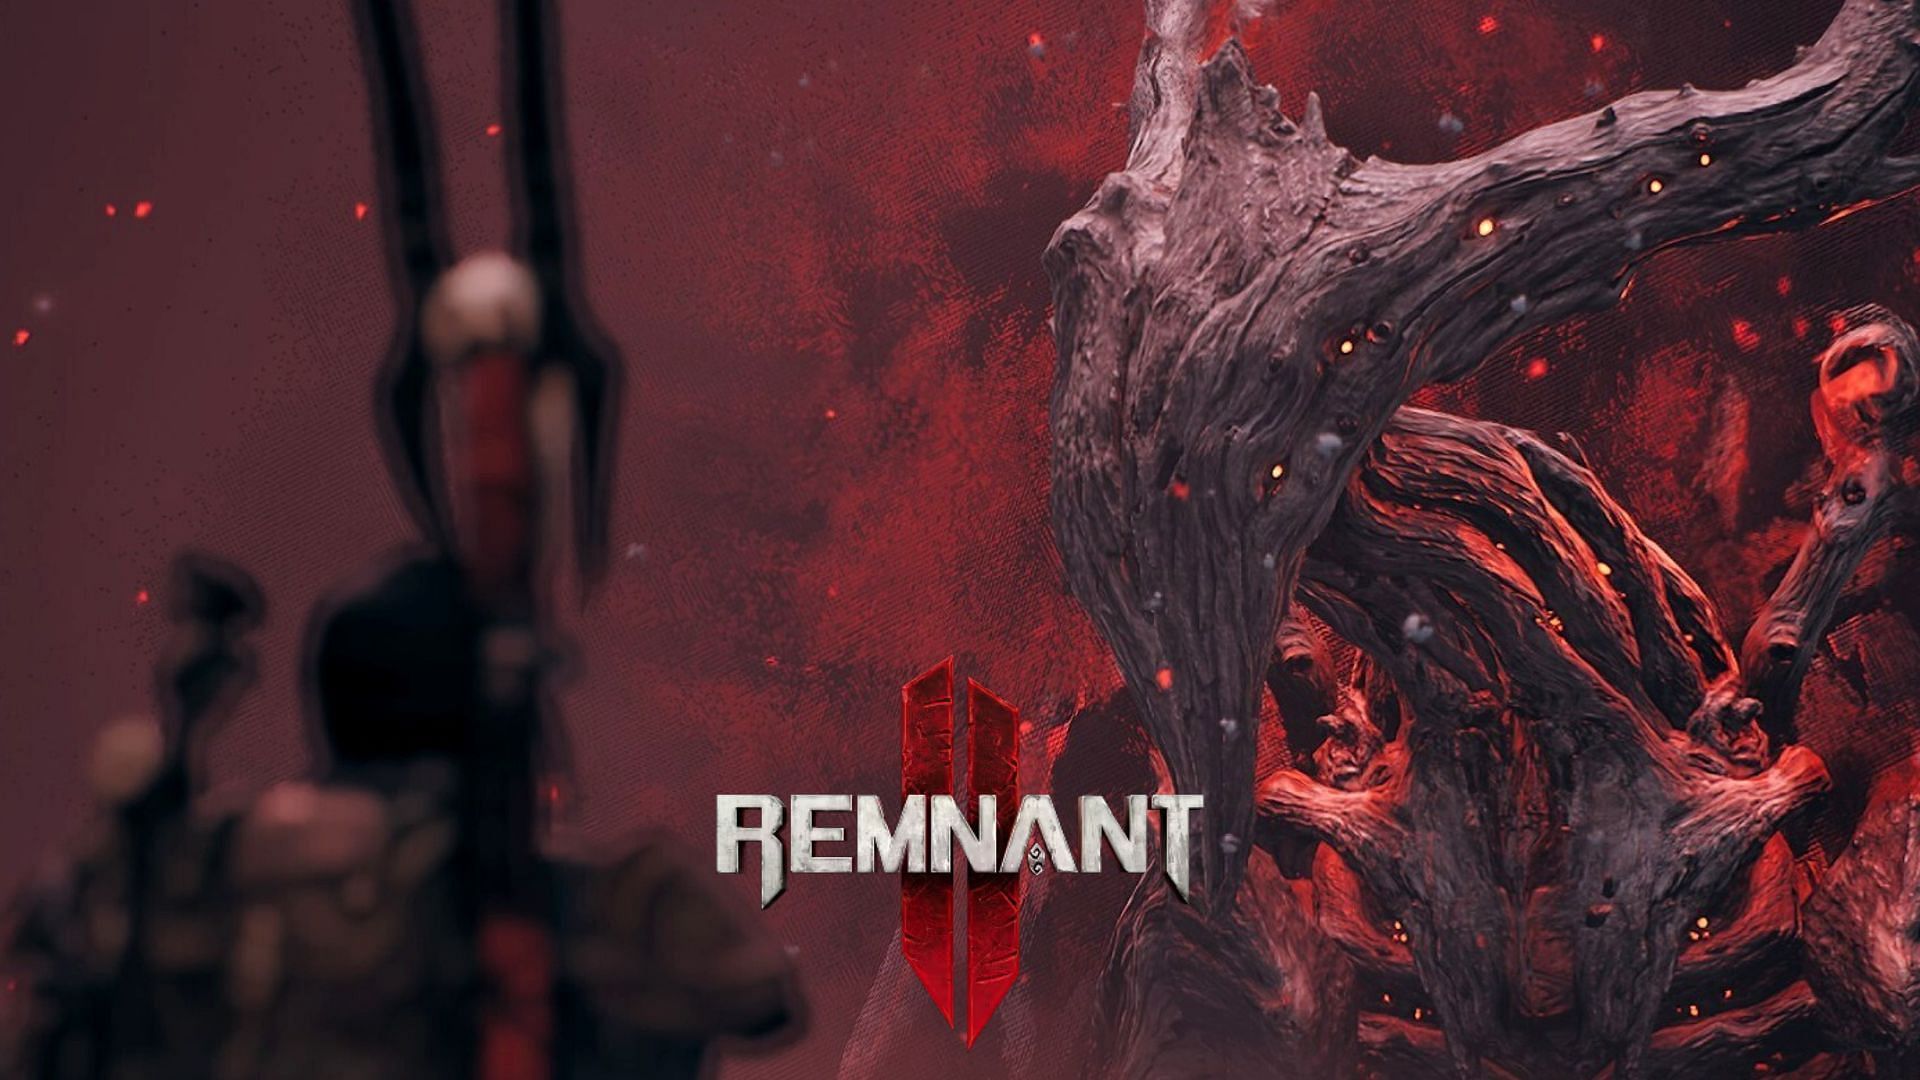 Ways to defeat the final boss in Remnant 2?